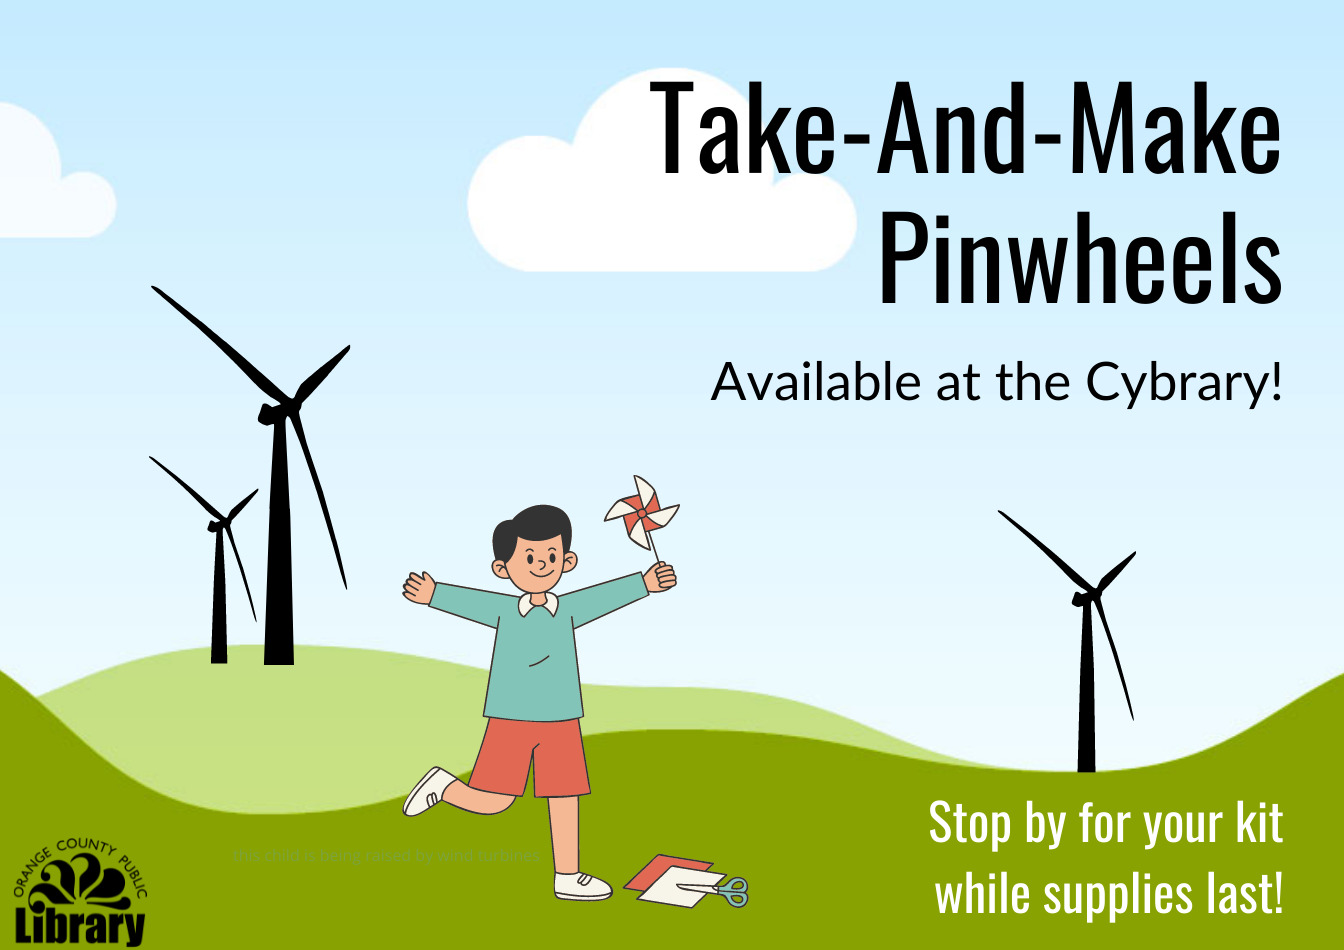 A drawing of a child playing with a pinwheel on a landscape of hills and wind turbines. Text: Take-and-make pinwheels available at the Cybrary! Stop by for your kit while supplies last!